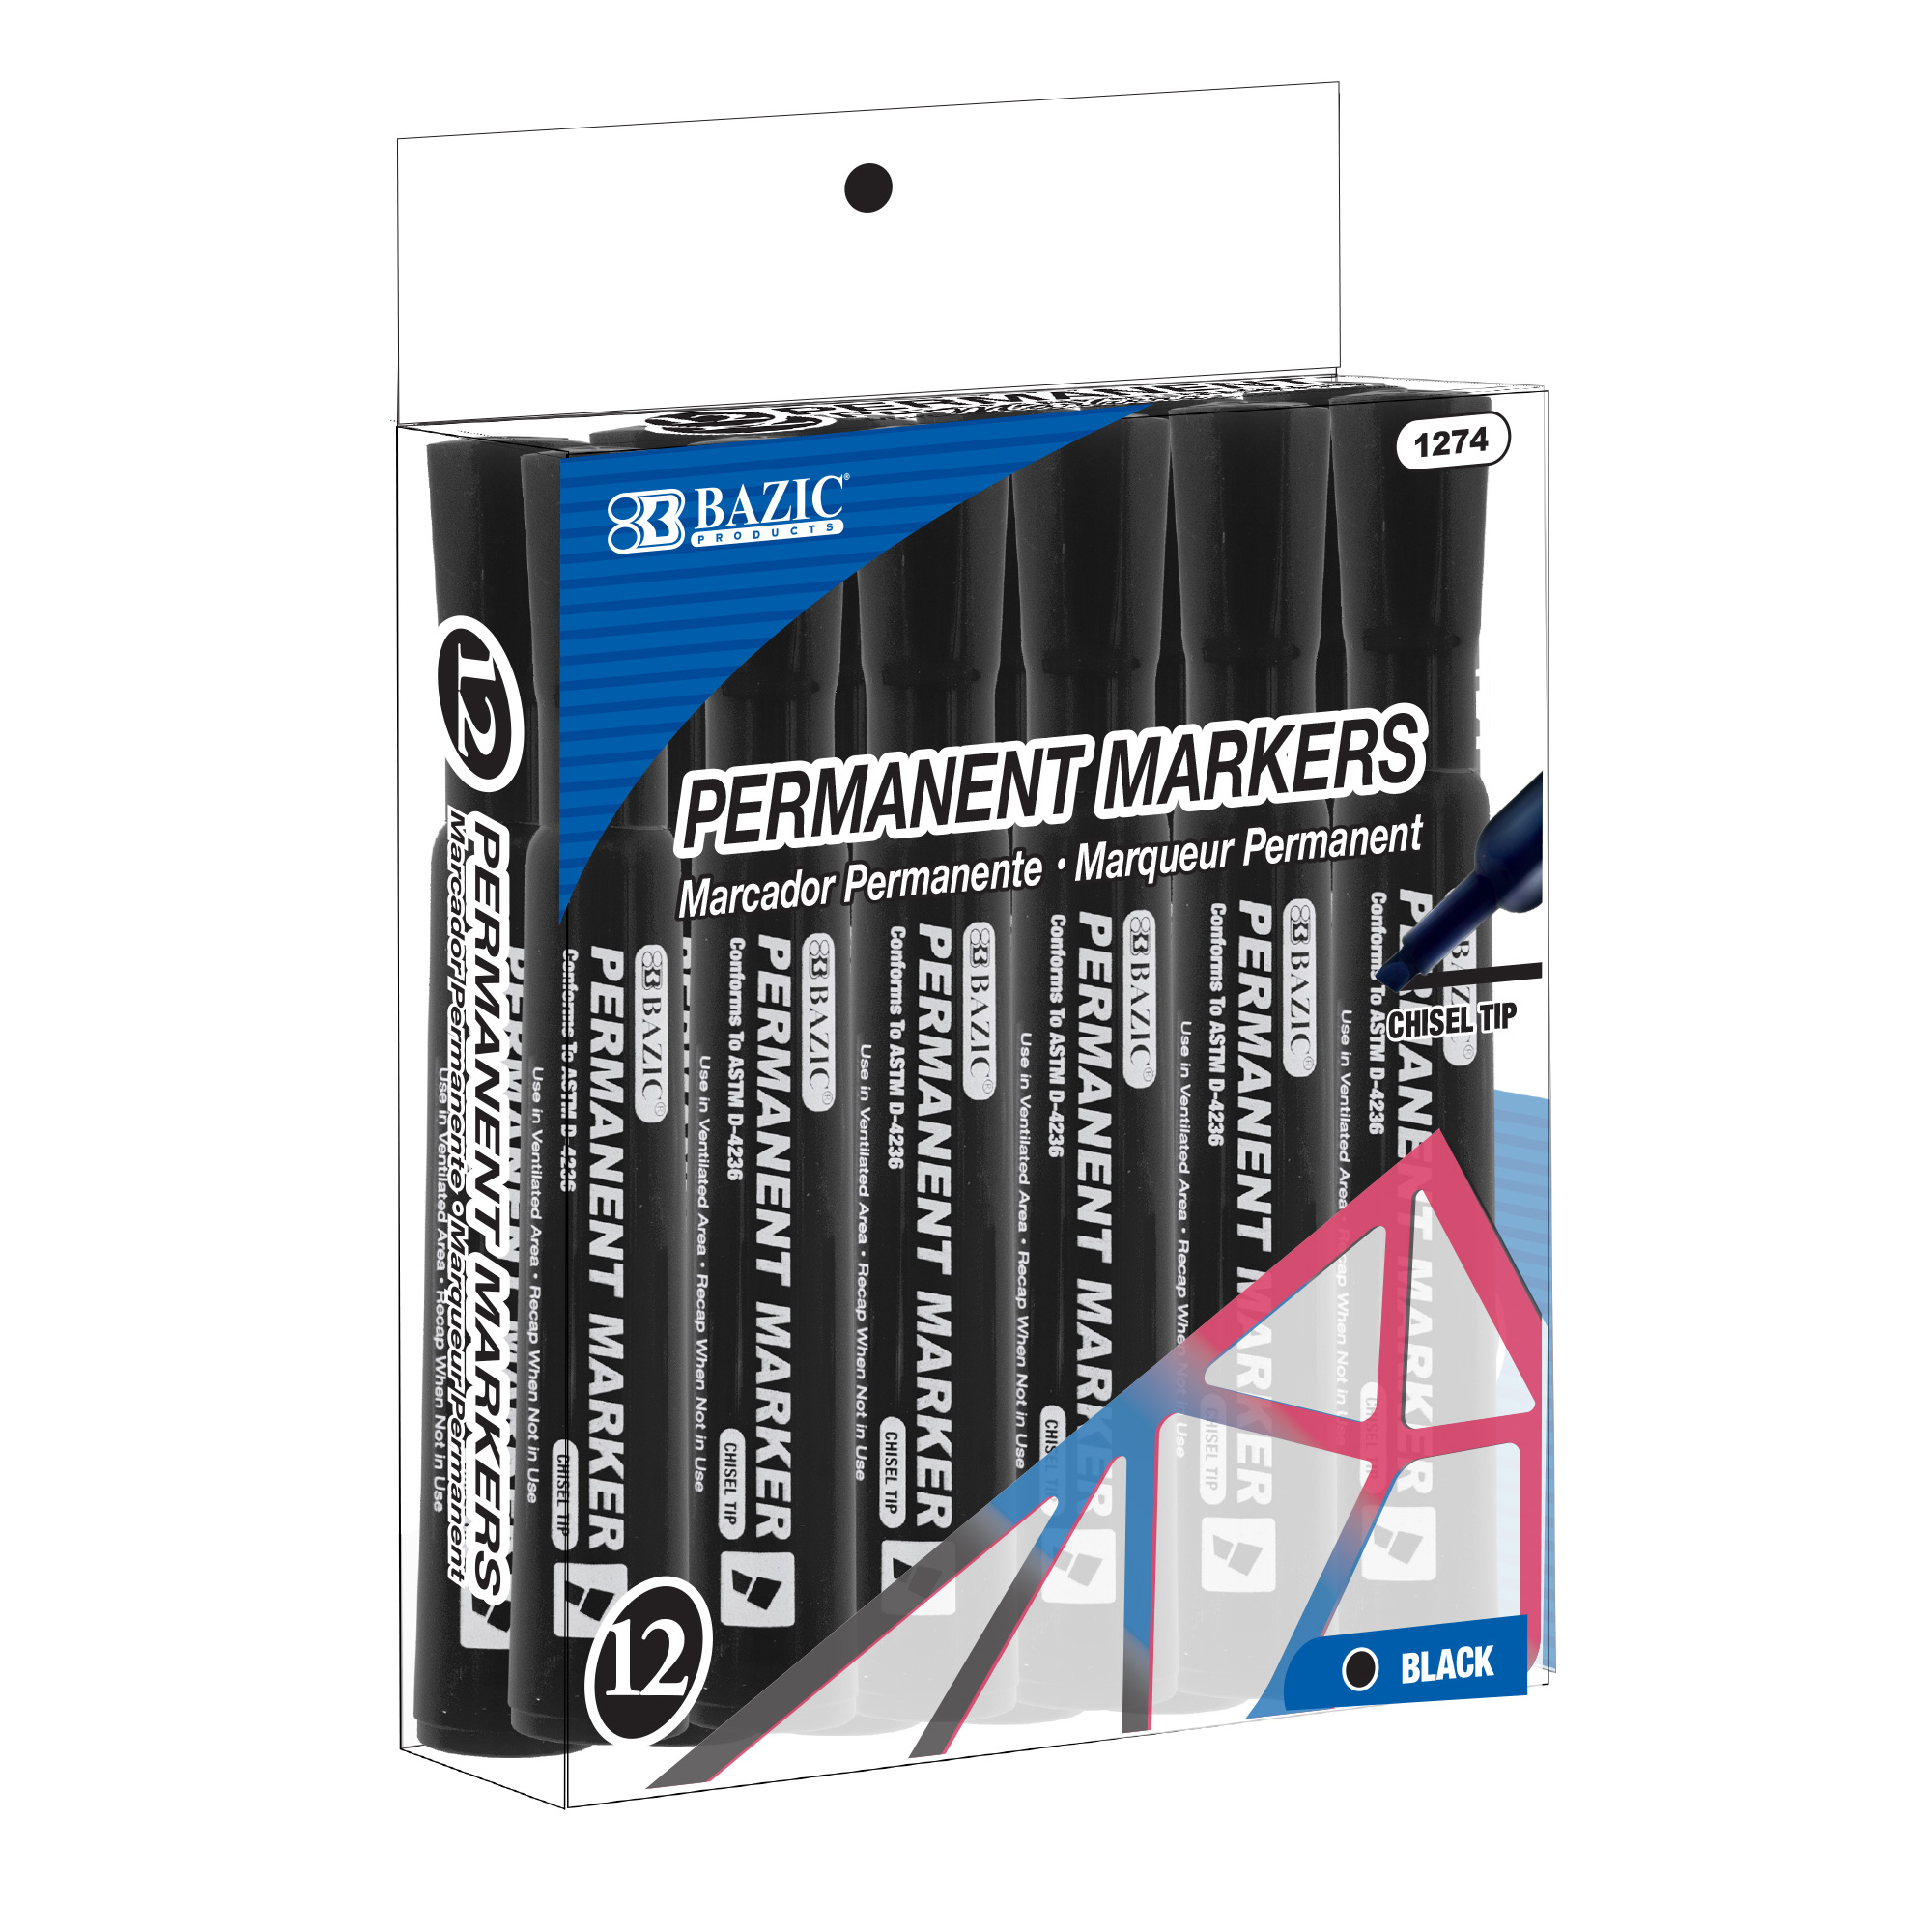 Bazic Permanent Marker Dual Fine Tip Chisel Point Black Markers (2/Pack), 24-Packs